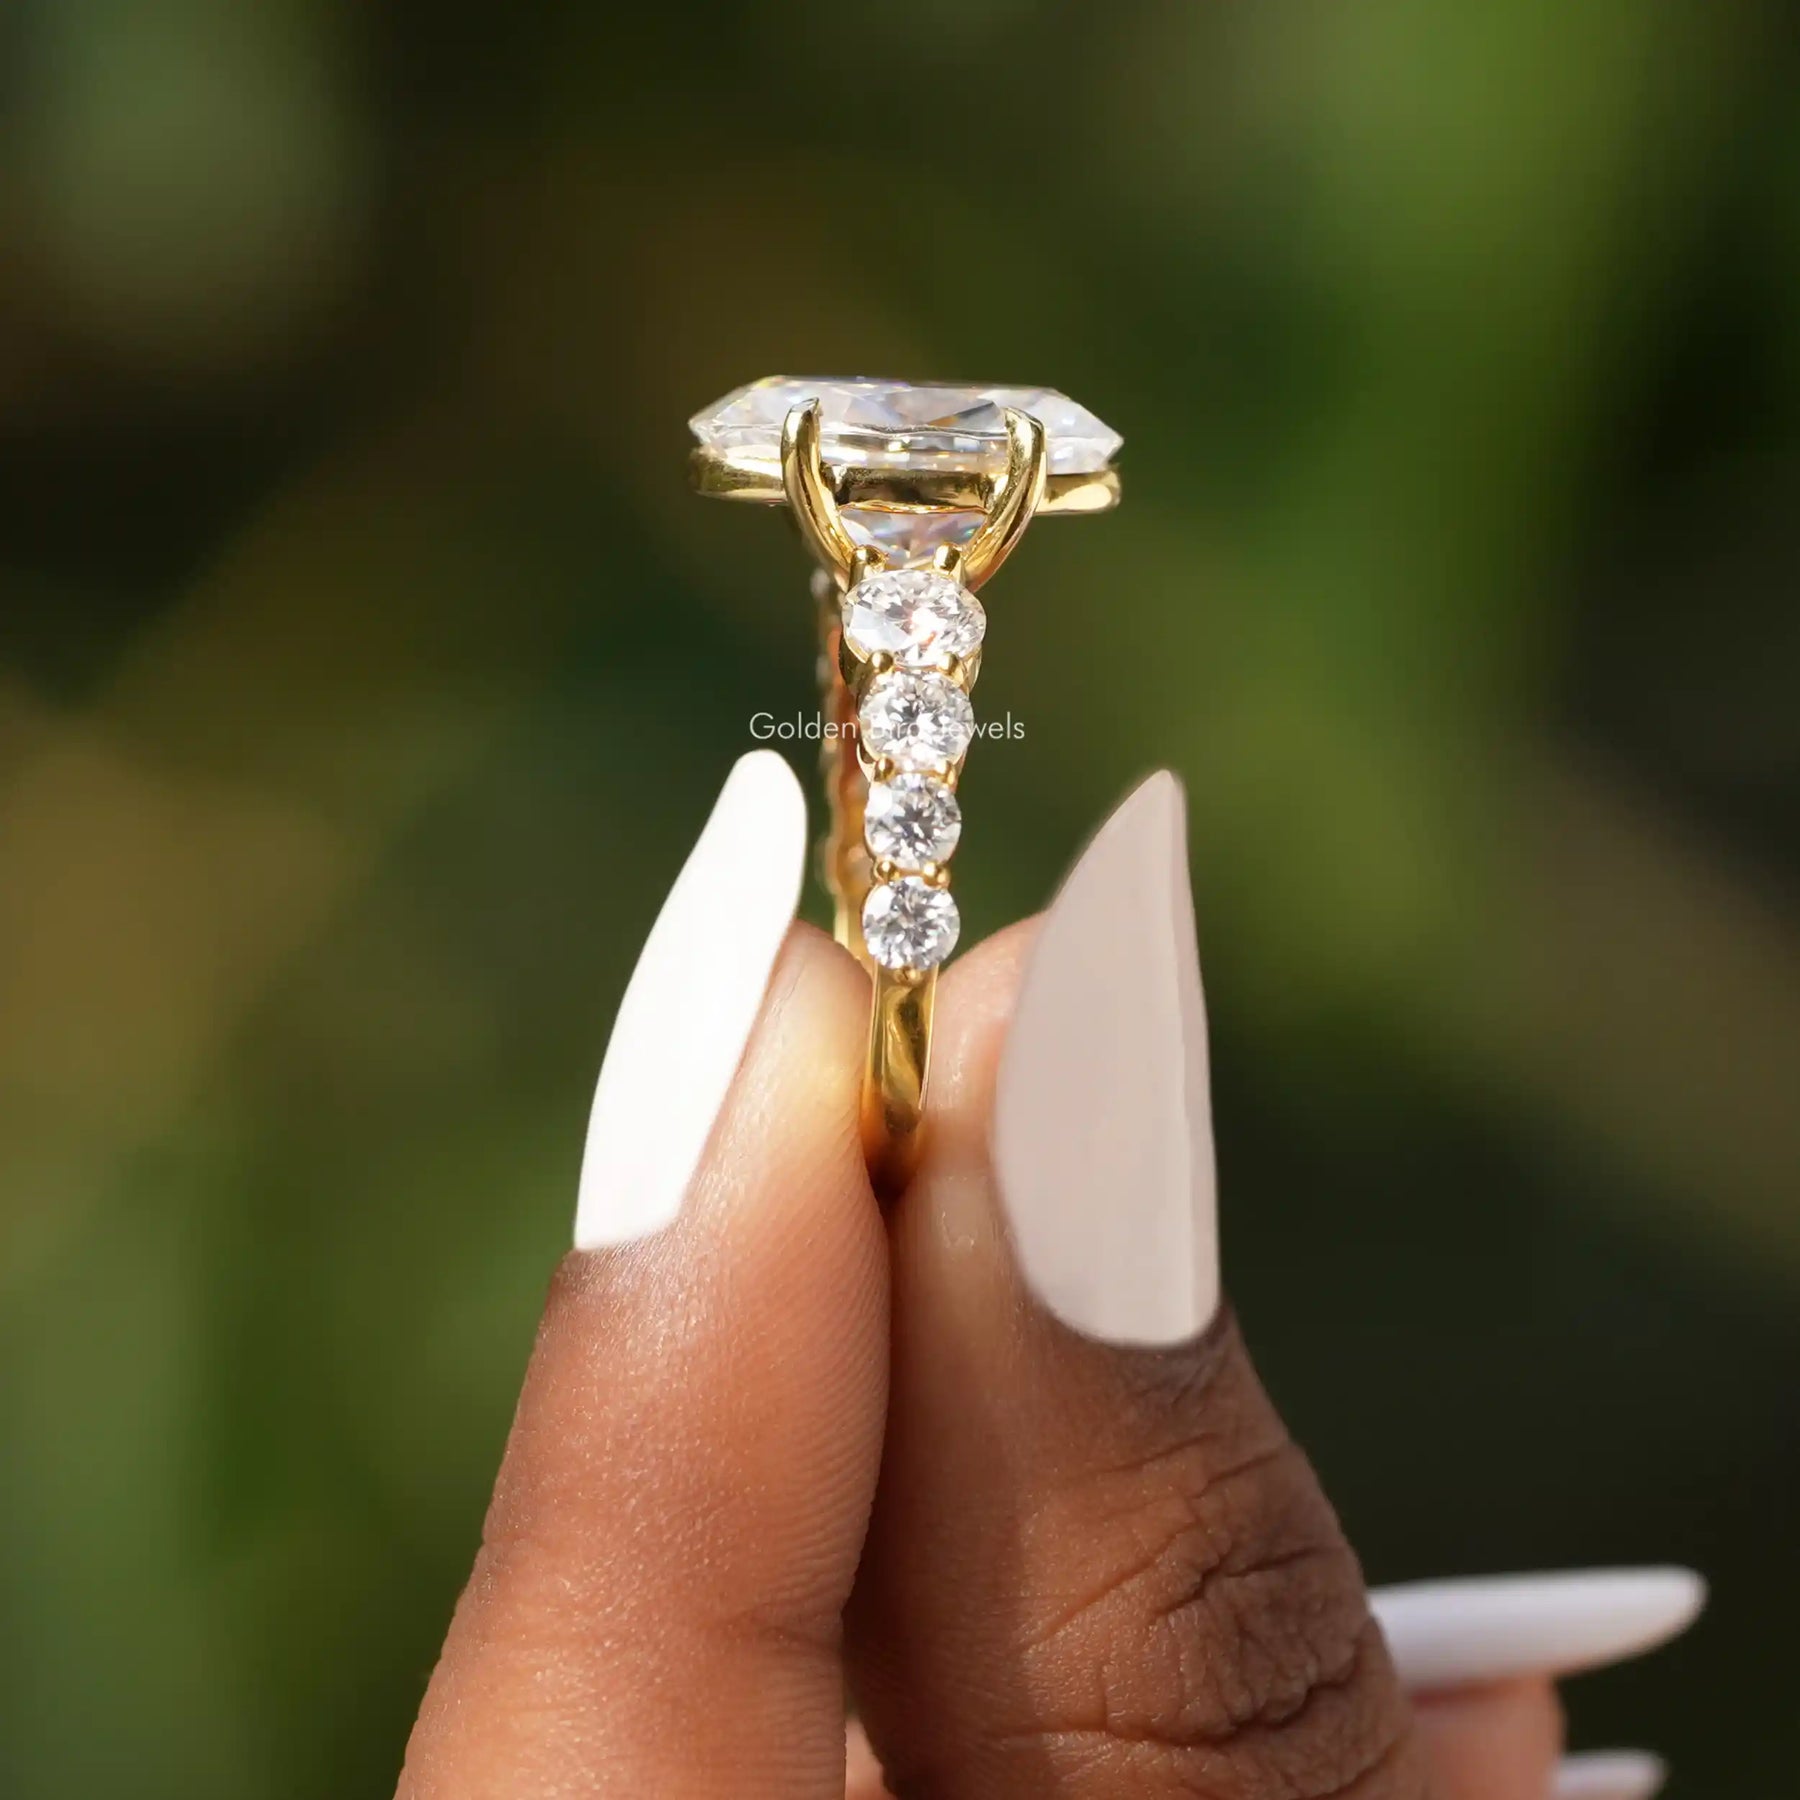 [Side view of oval cut moissanite engagement ring made of round cut side stones]-[Golden Bird Jewels]